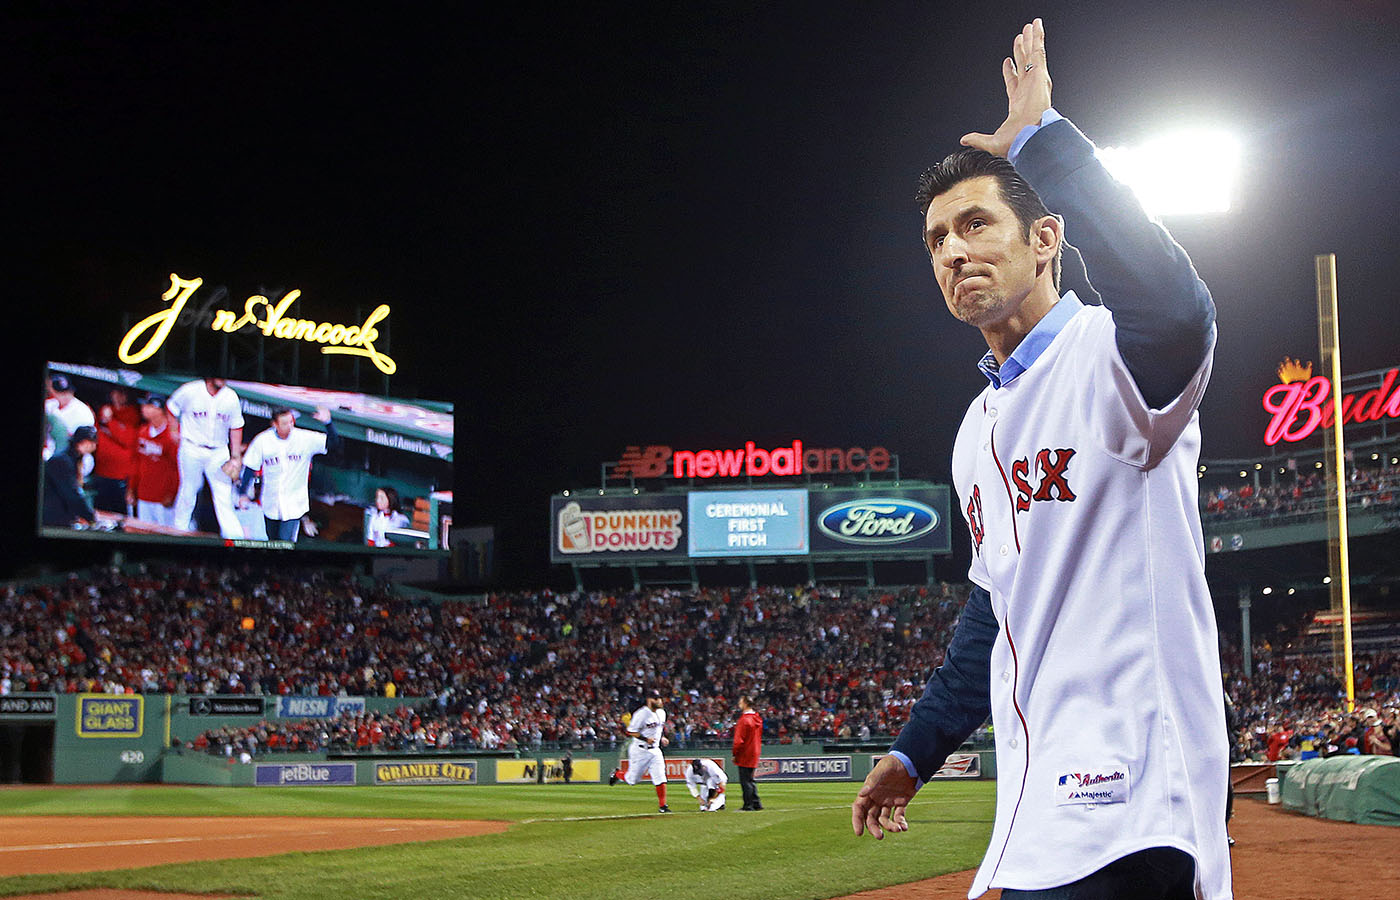 Did injuries cost Nomar Garciaparra the Hall of Fame? 